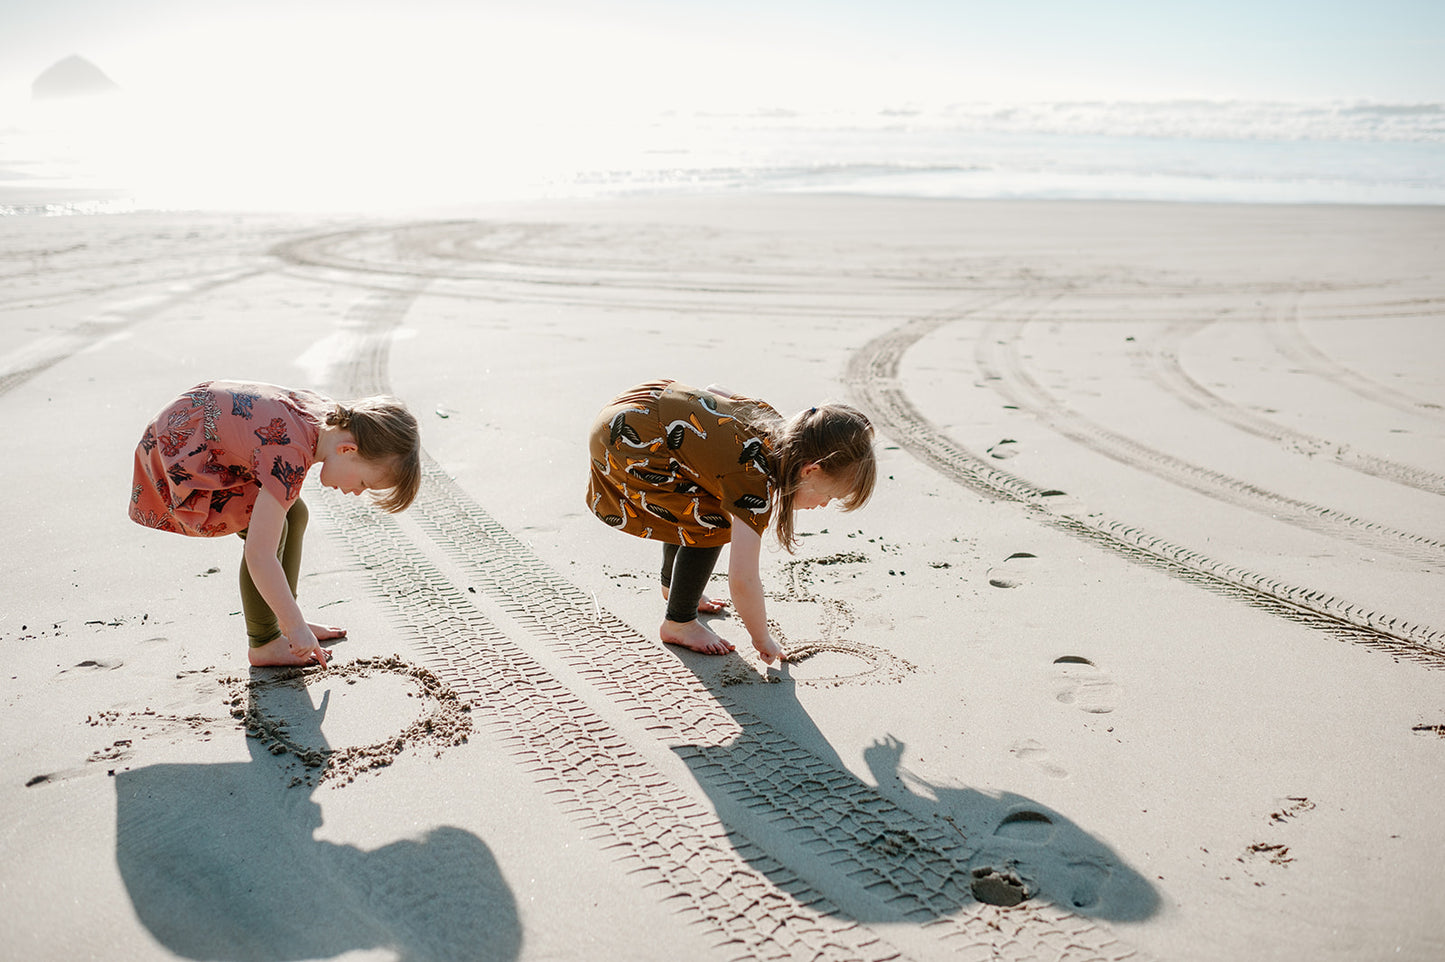 A photo of two young girls drawing in the sand on the beach, one in this coral dress